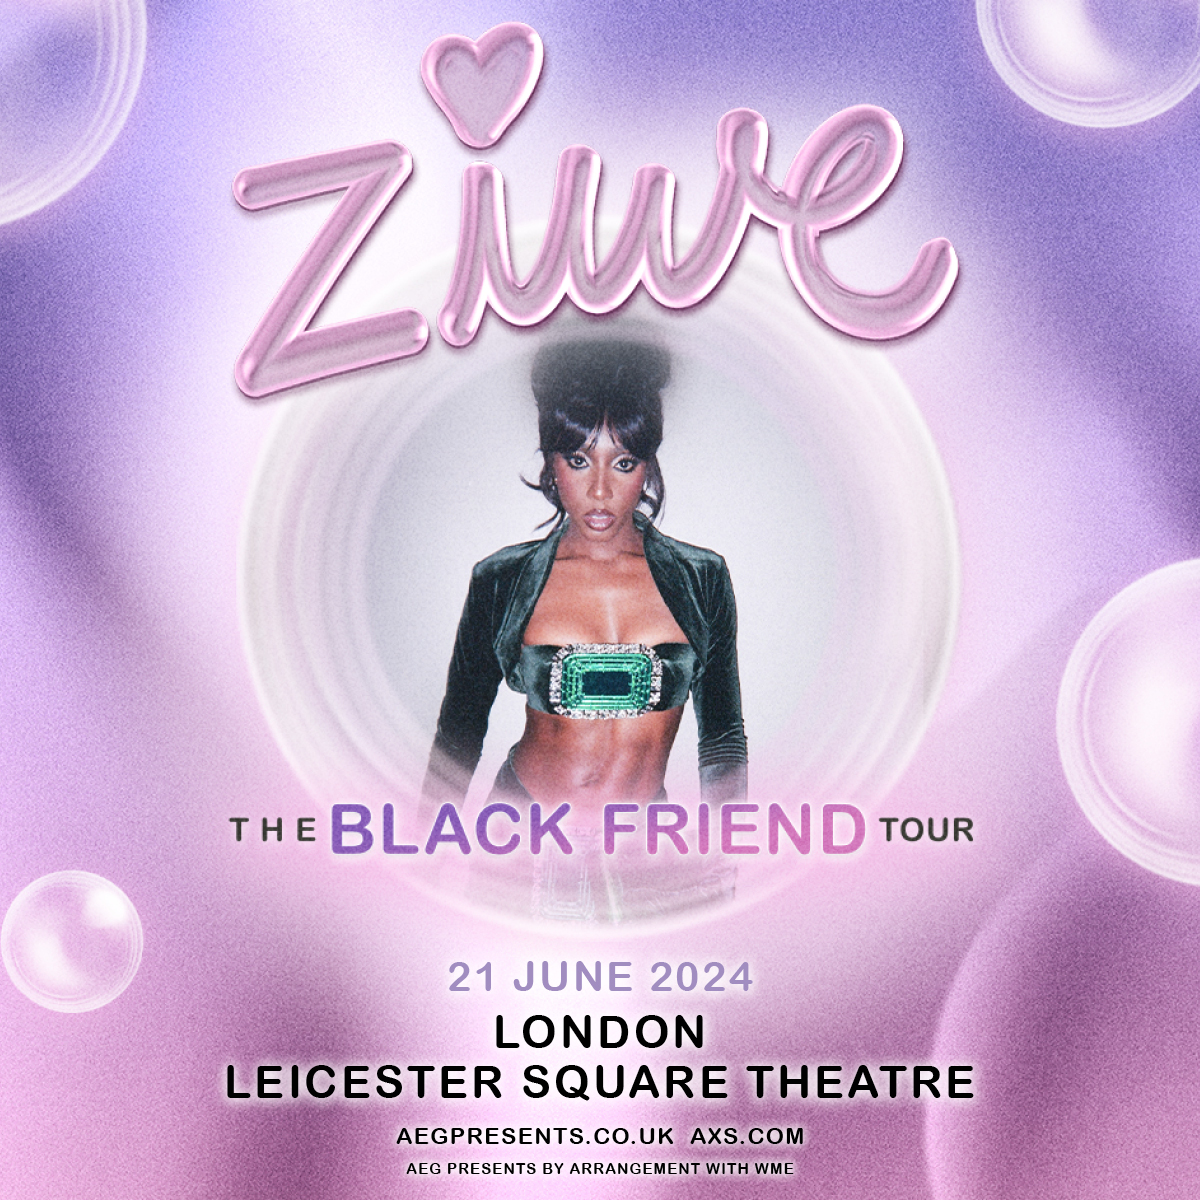 ON SALE NOW! @ziwe | The Black Friend Tour | 21 June 2024 Tickets on sale now: aegp.uk/ZIWE24